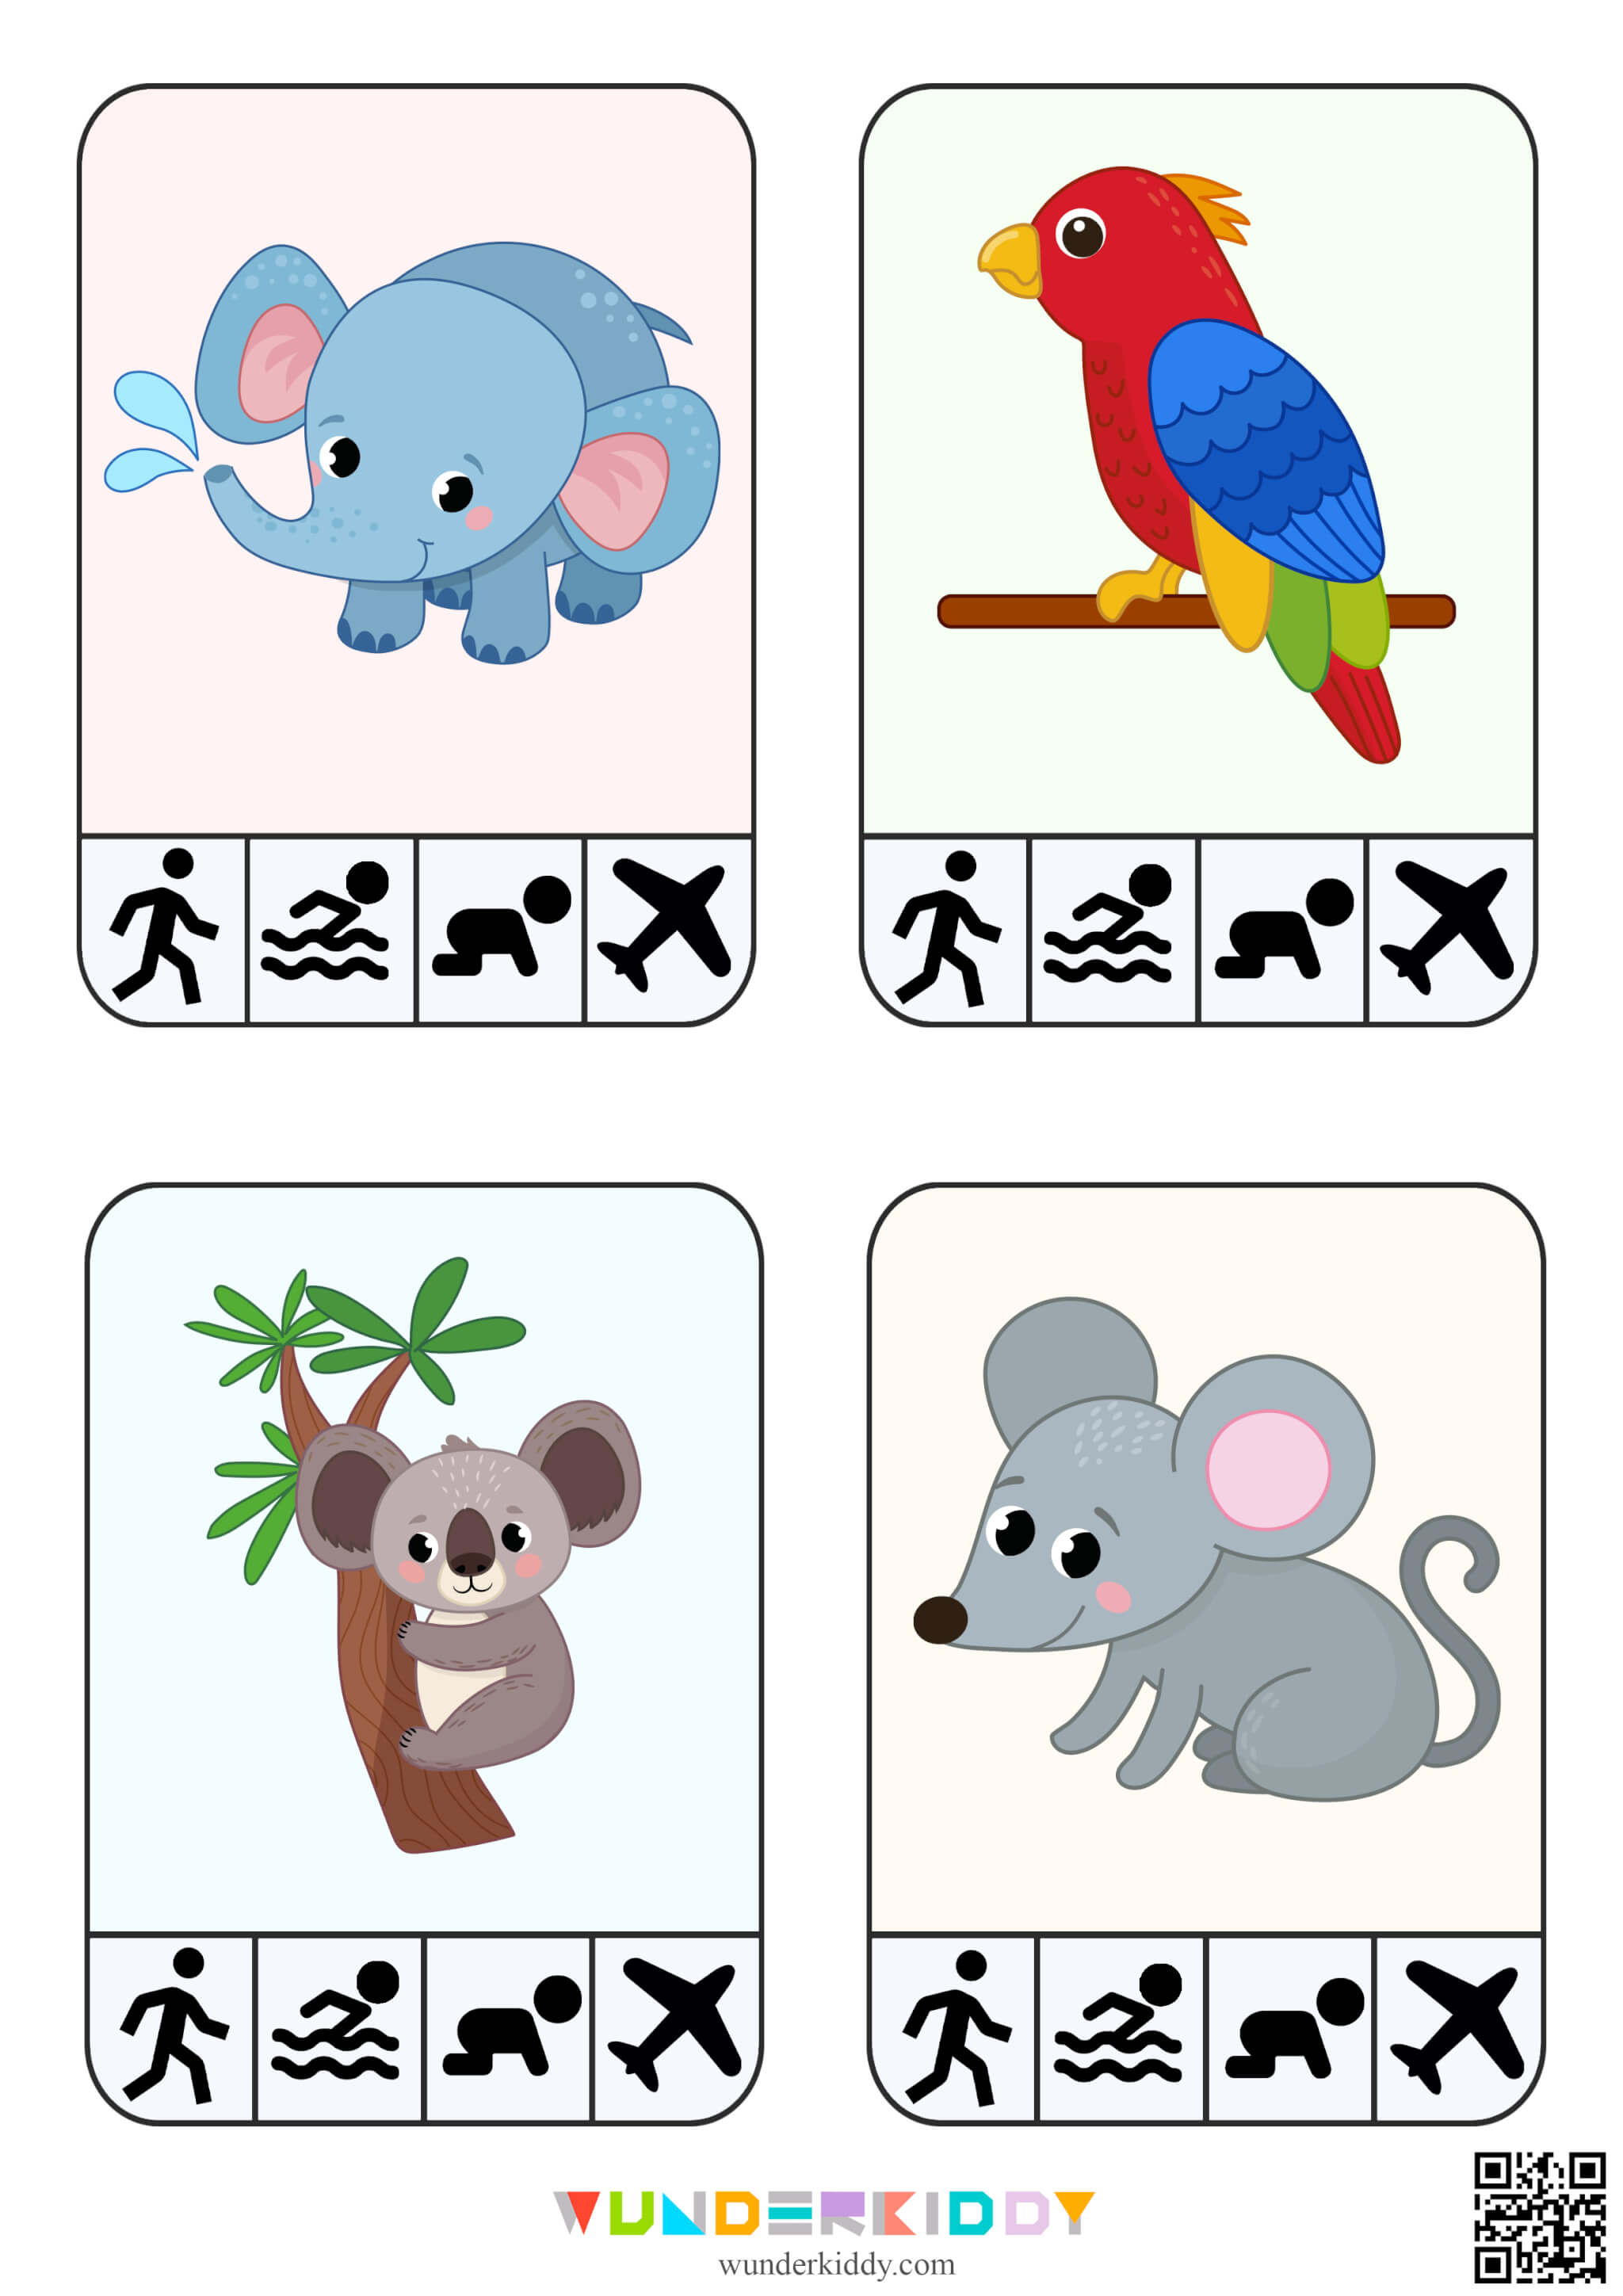 Animal Movements Activity for Kids - Image 4